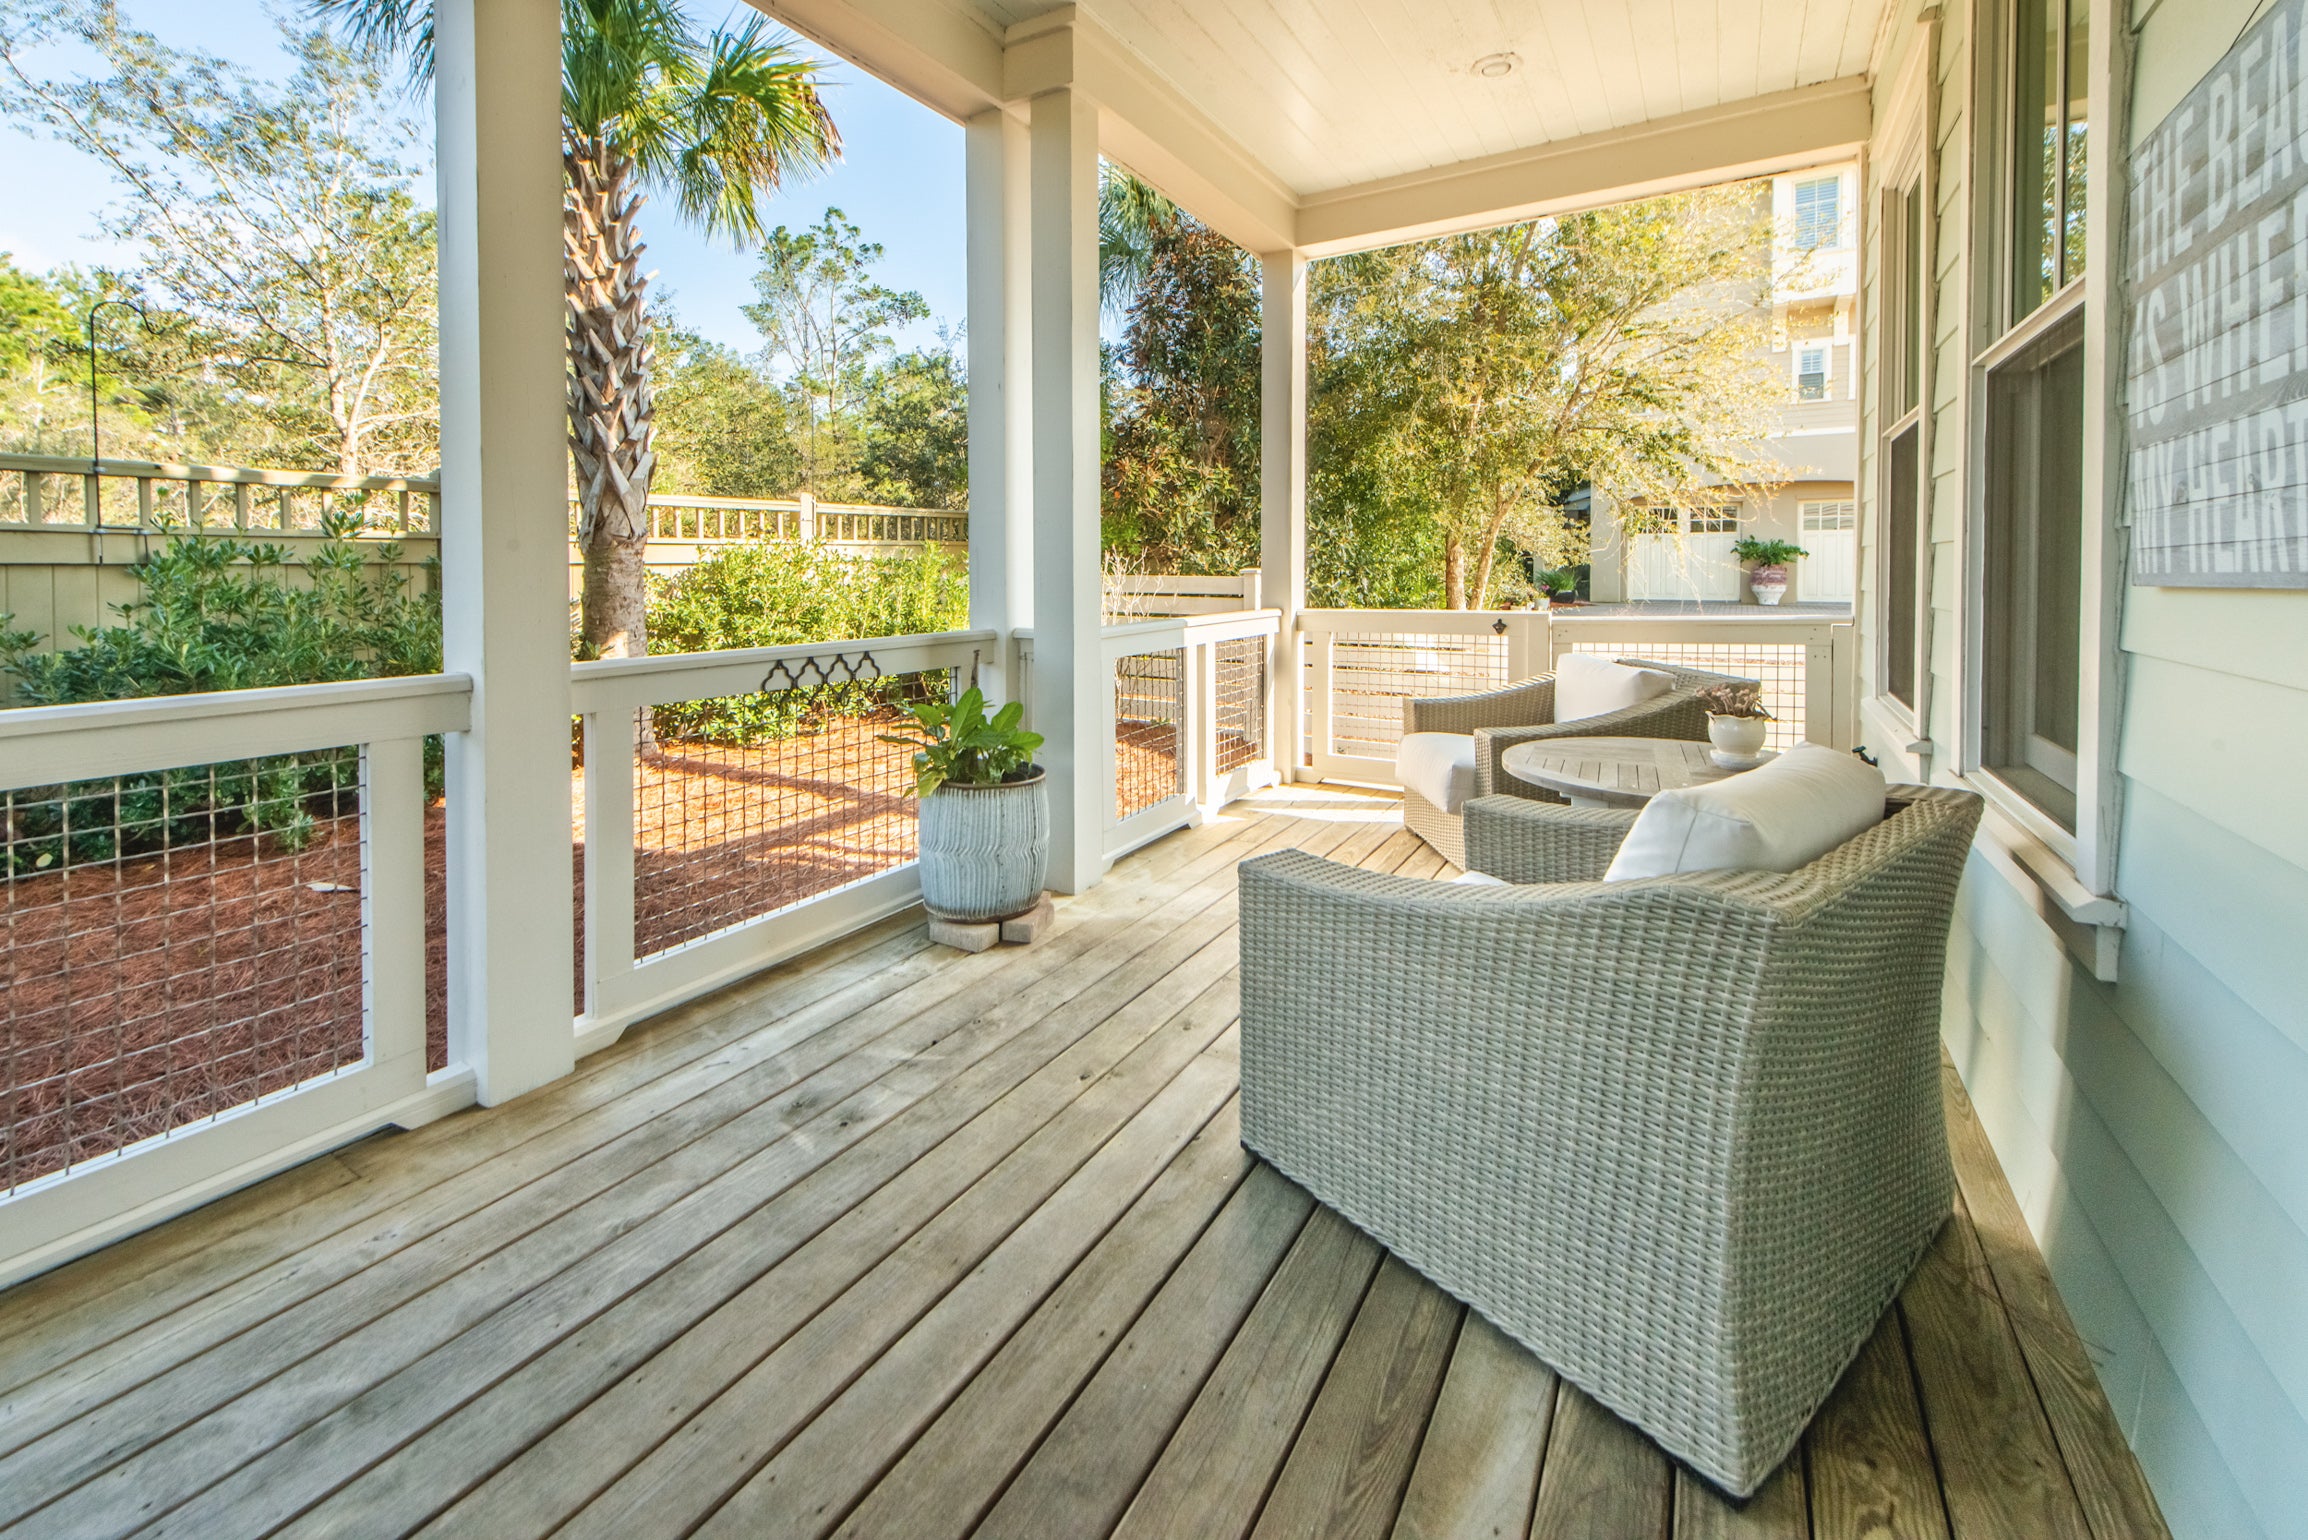 The spacious front porch welcomes you